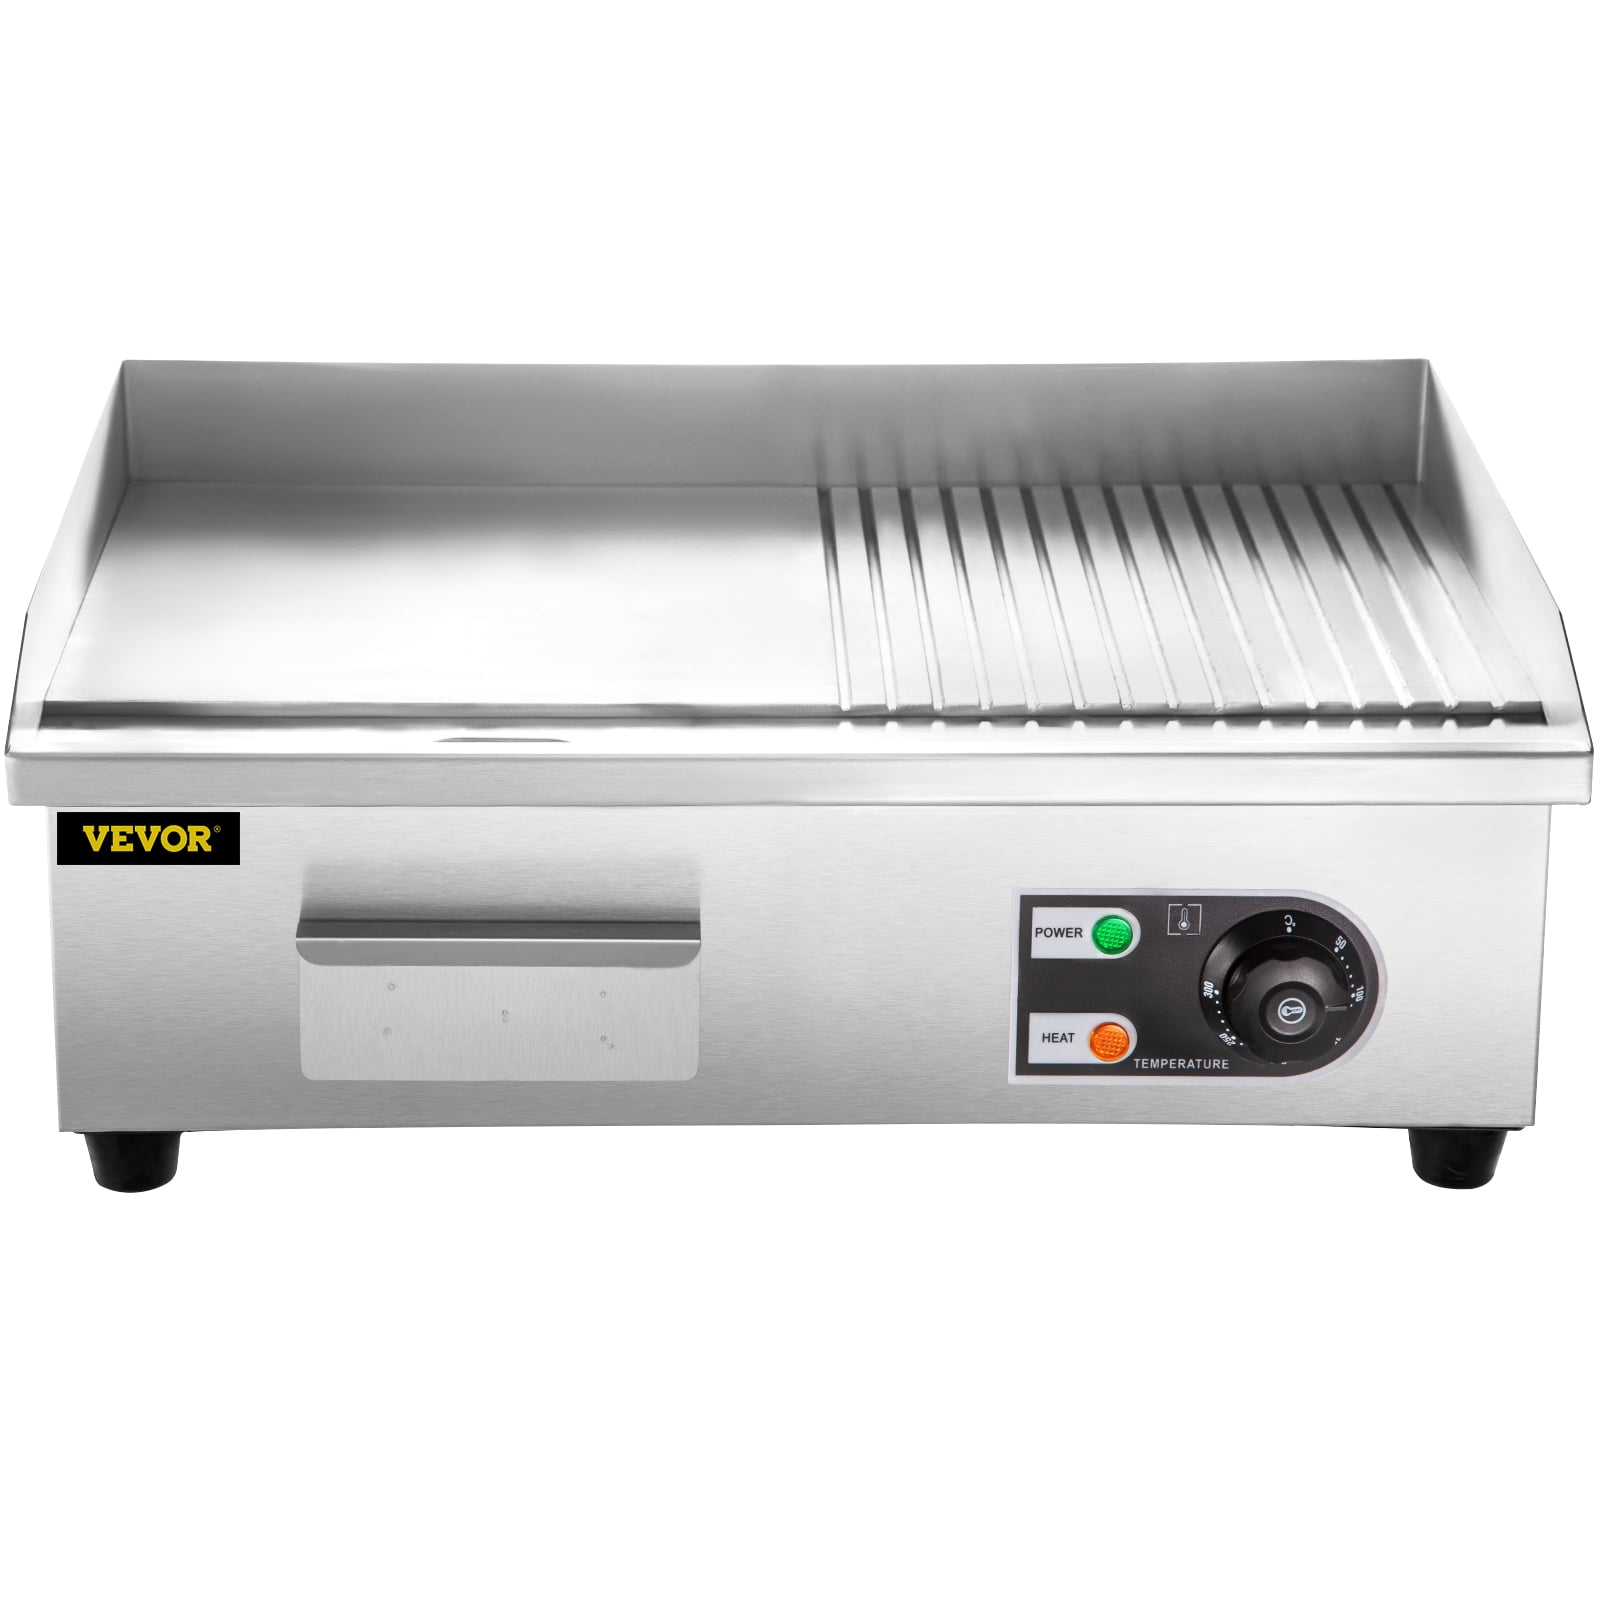 KOTEK Commercial Electric Griddle, 2000W 22” Flat Top Griddle, Stainless  Steel Frame & Drip Tray, Adjustable Temperature Control 122℉-572℉,  Countertop